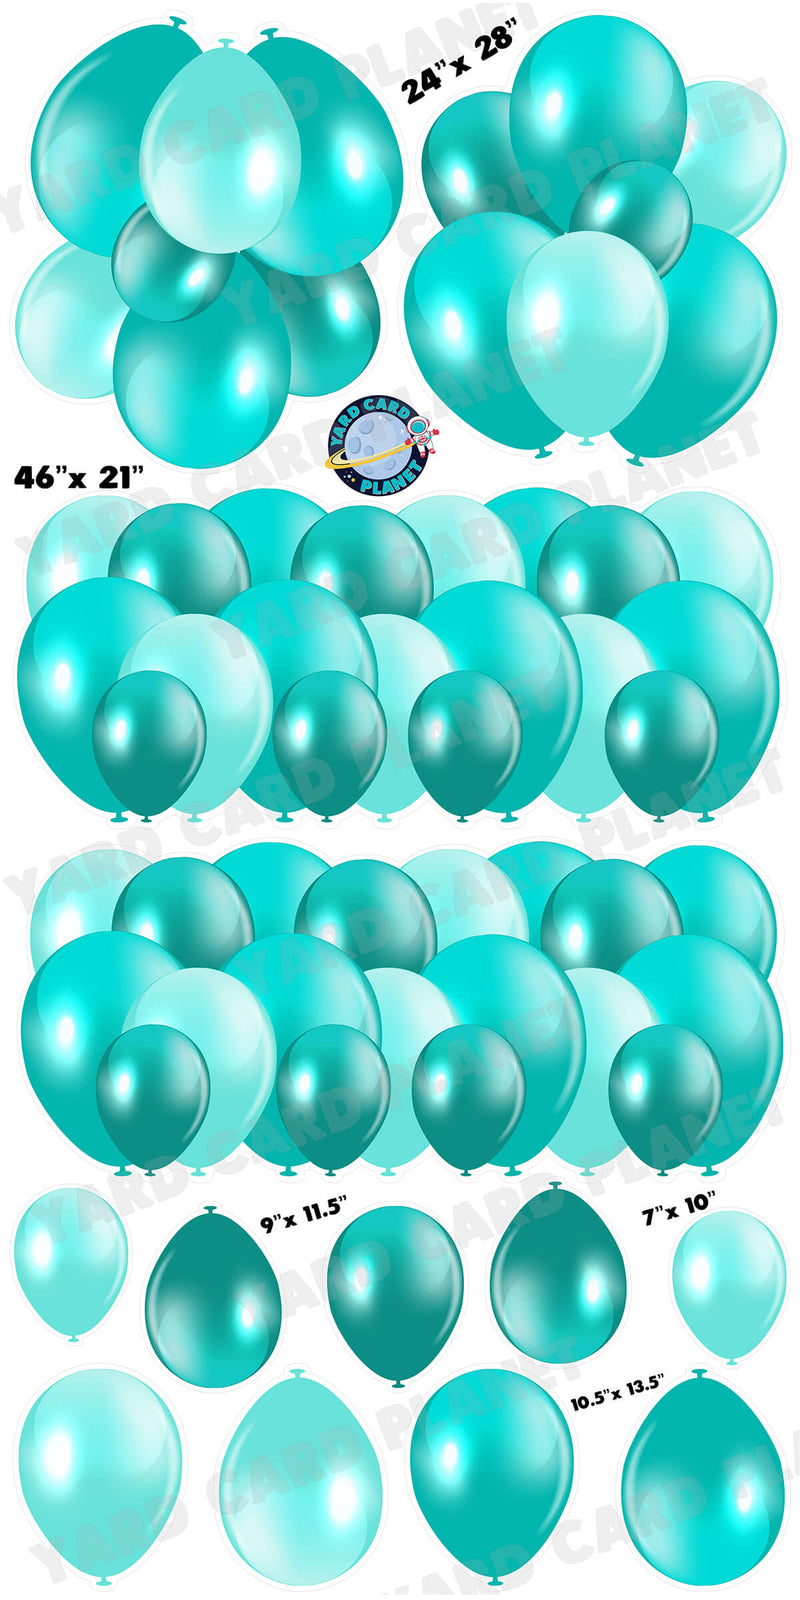 Teal Balloon Panels, Bouquets and Singles Yard Card Set